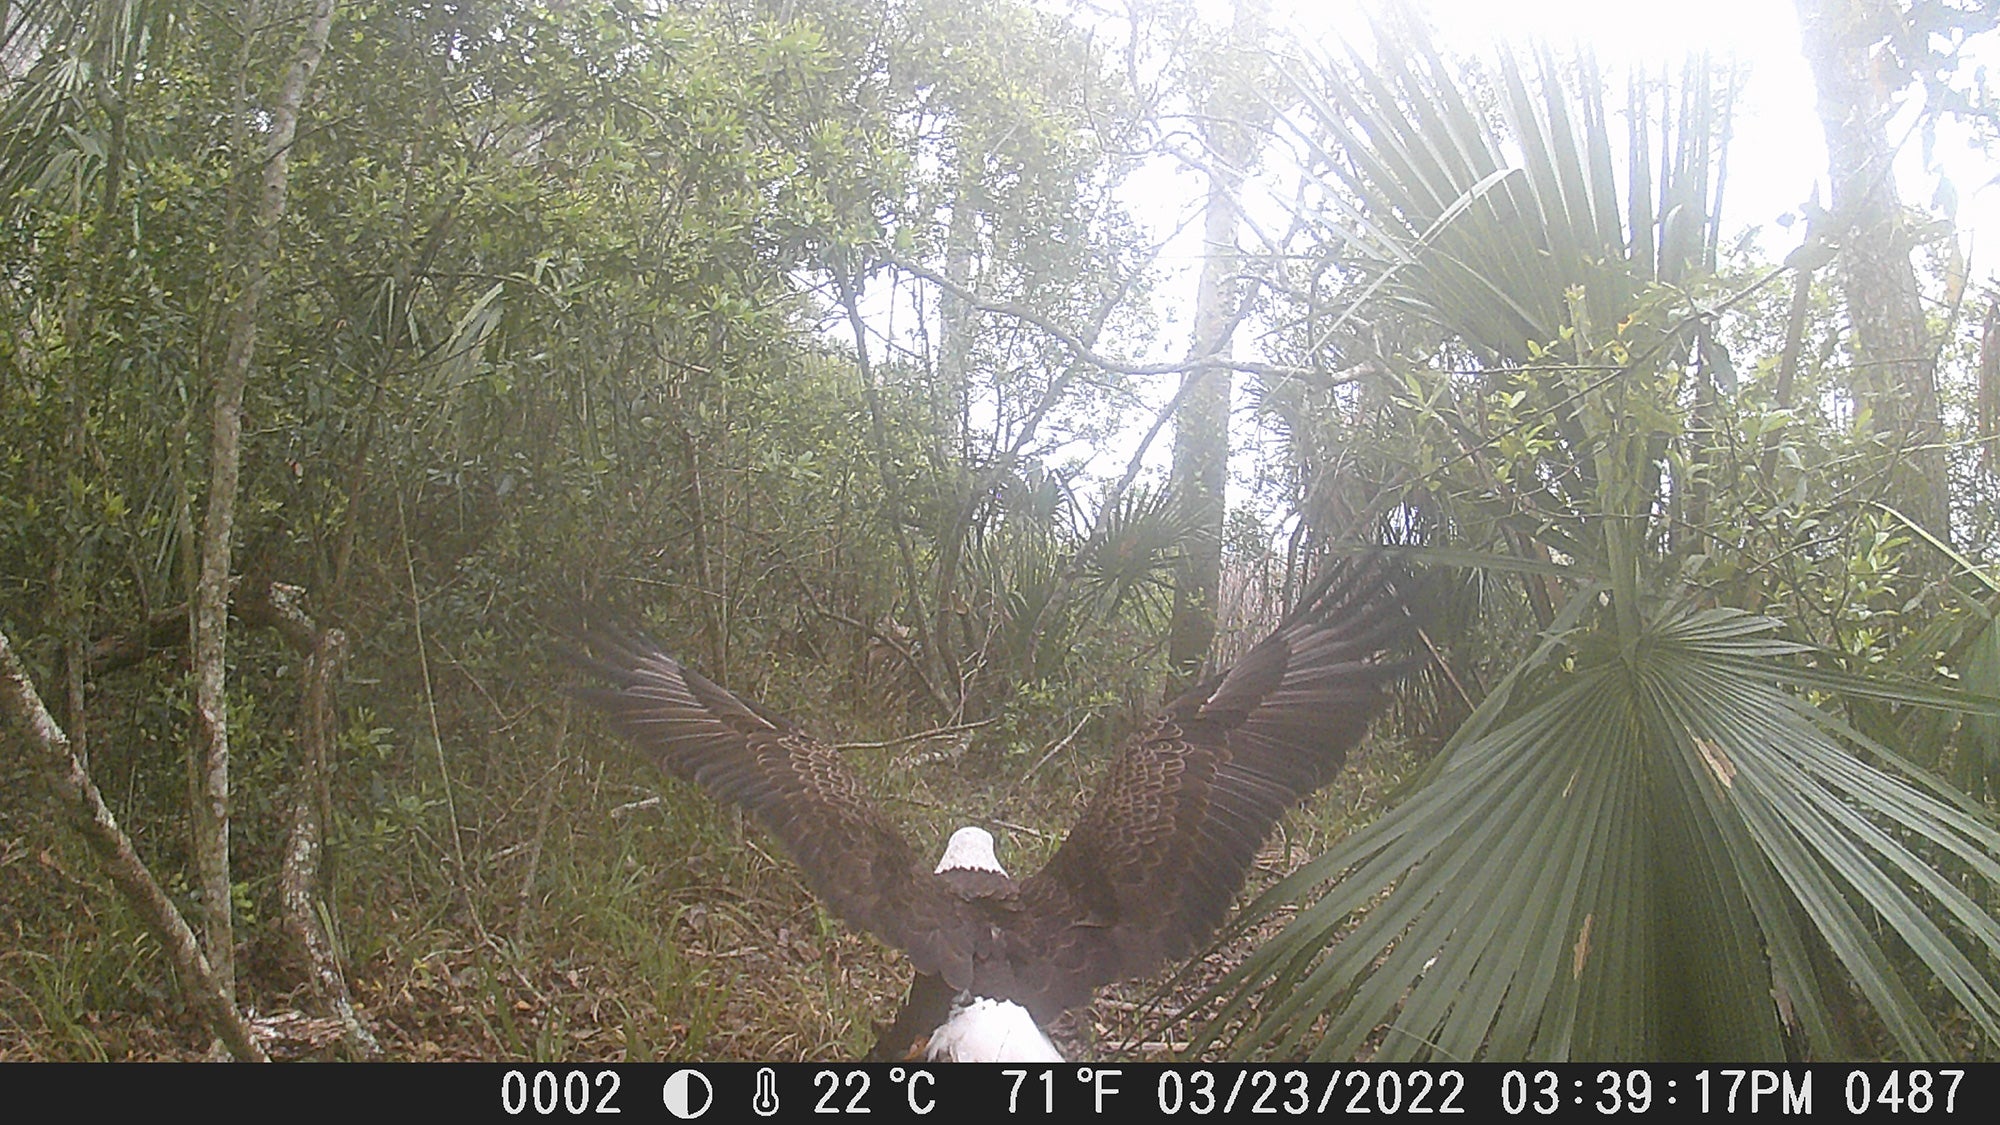 Trail cameras can catch some cool action.